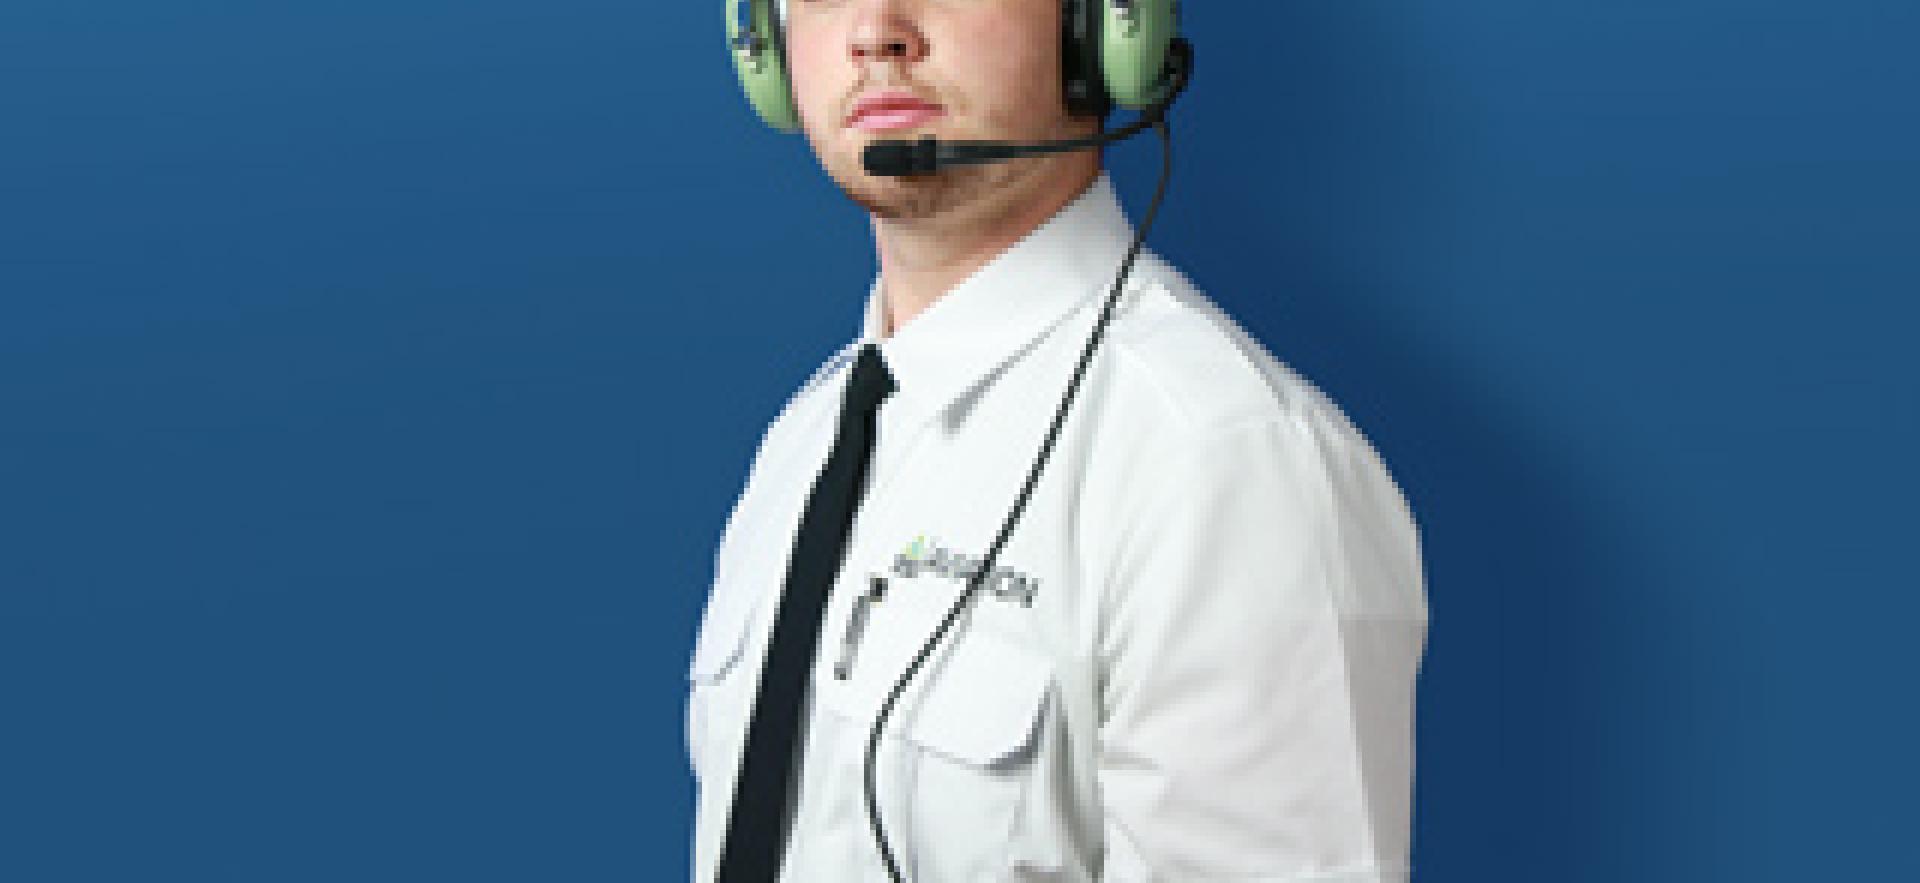 Aviation student in uniform and with headset looking at camera with text overlay YOUR TIME TO BE SOARING